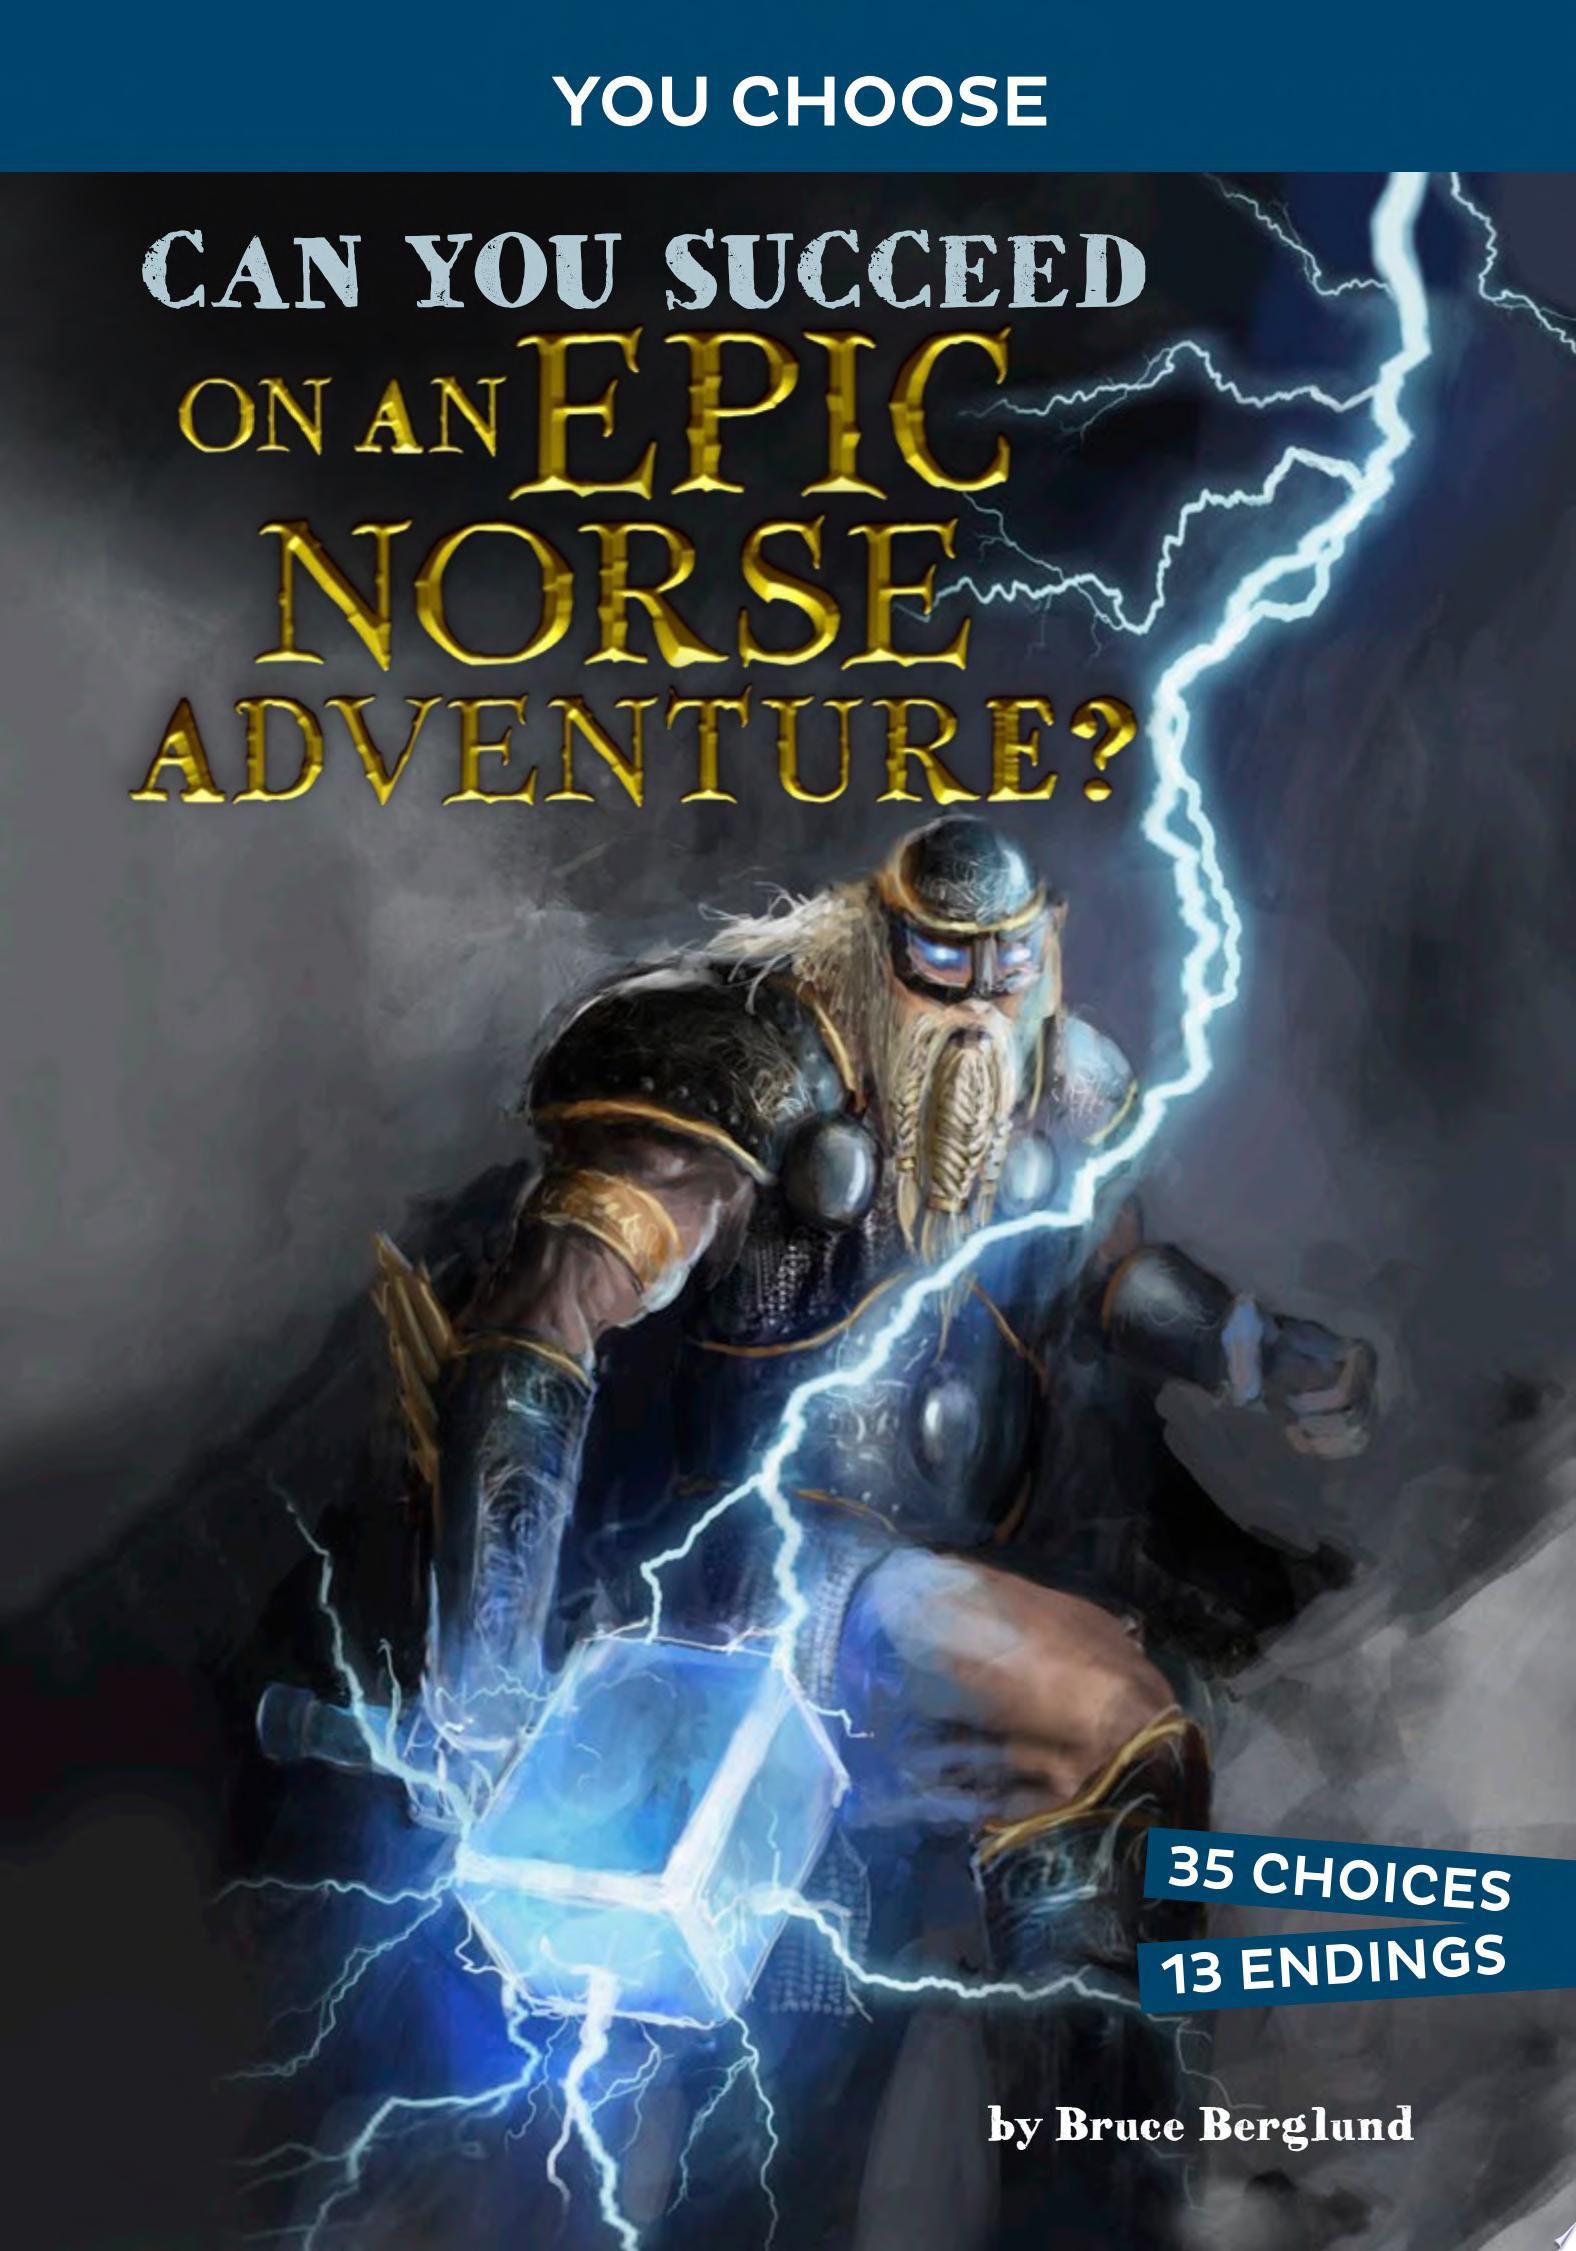 Image for "Can You Succeed on an Epic Norse Adventure?"